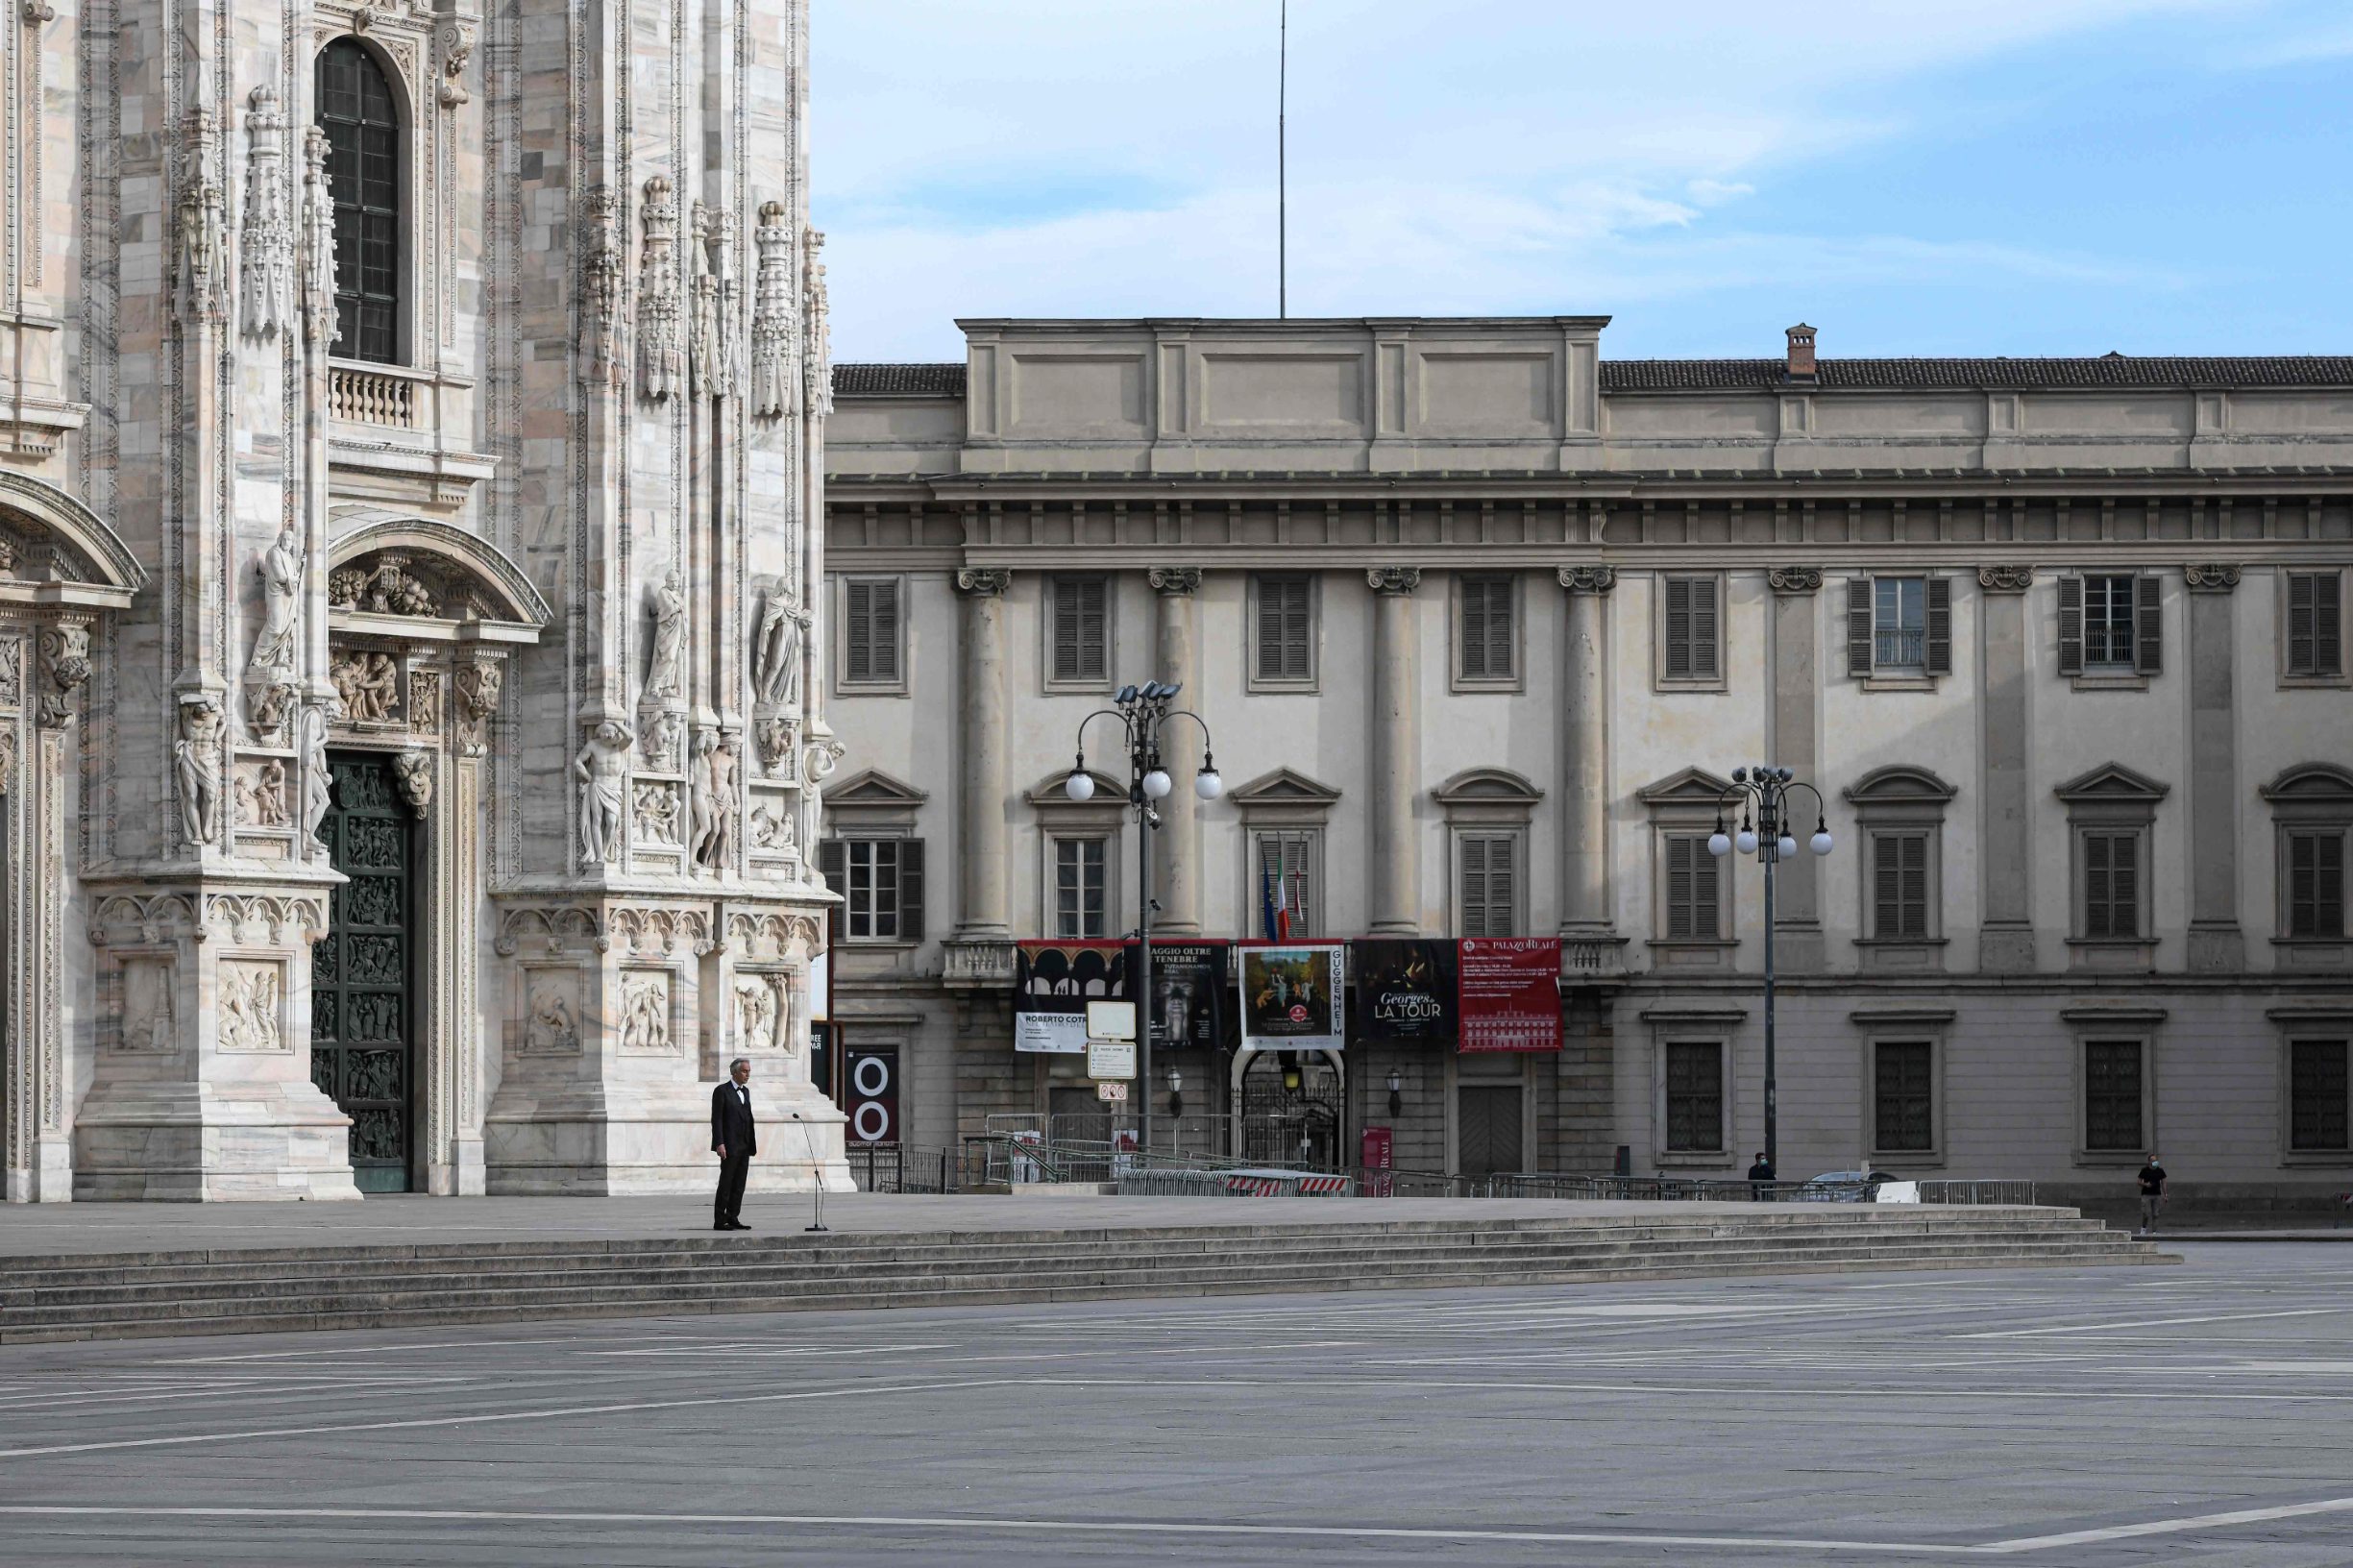 Italian tenor and opera singer Andrea Bocelli (L) rehearses on a deserted Piazza del Duomo in central Milan on April 12, 2020, prior to an evening performance without public for the world wounded by the pandemic, during the country's lockdown aimed at curbing the spread of the COVID-19 infection, caused by the novel coronavirus. (Photo by Piero Cruciatti / AFP)